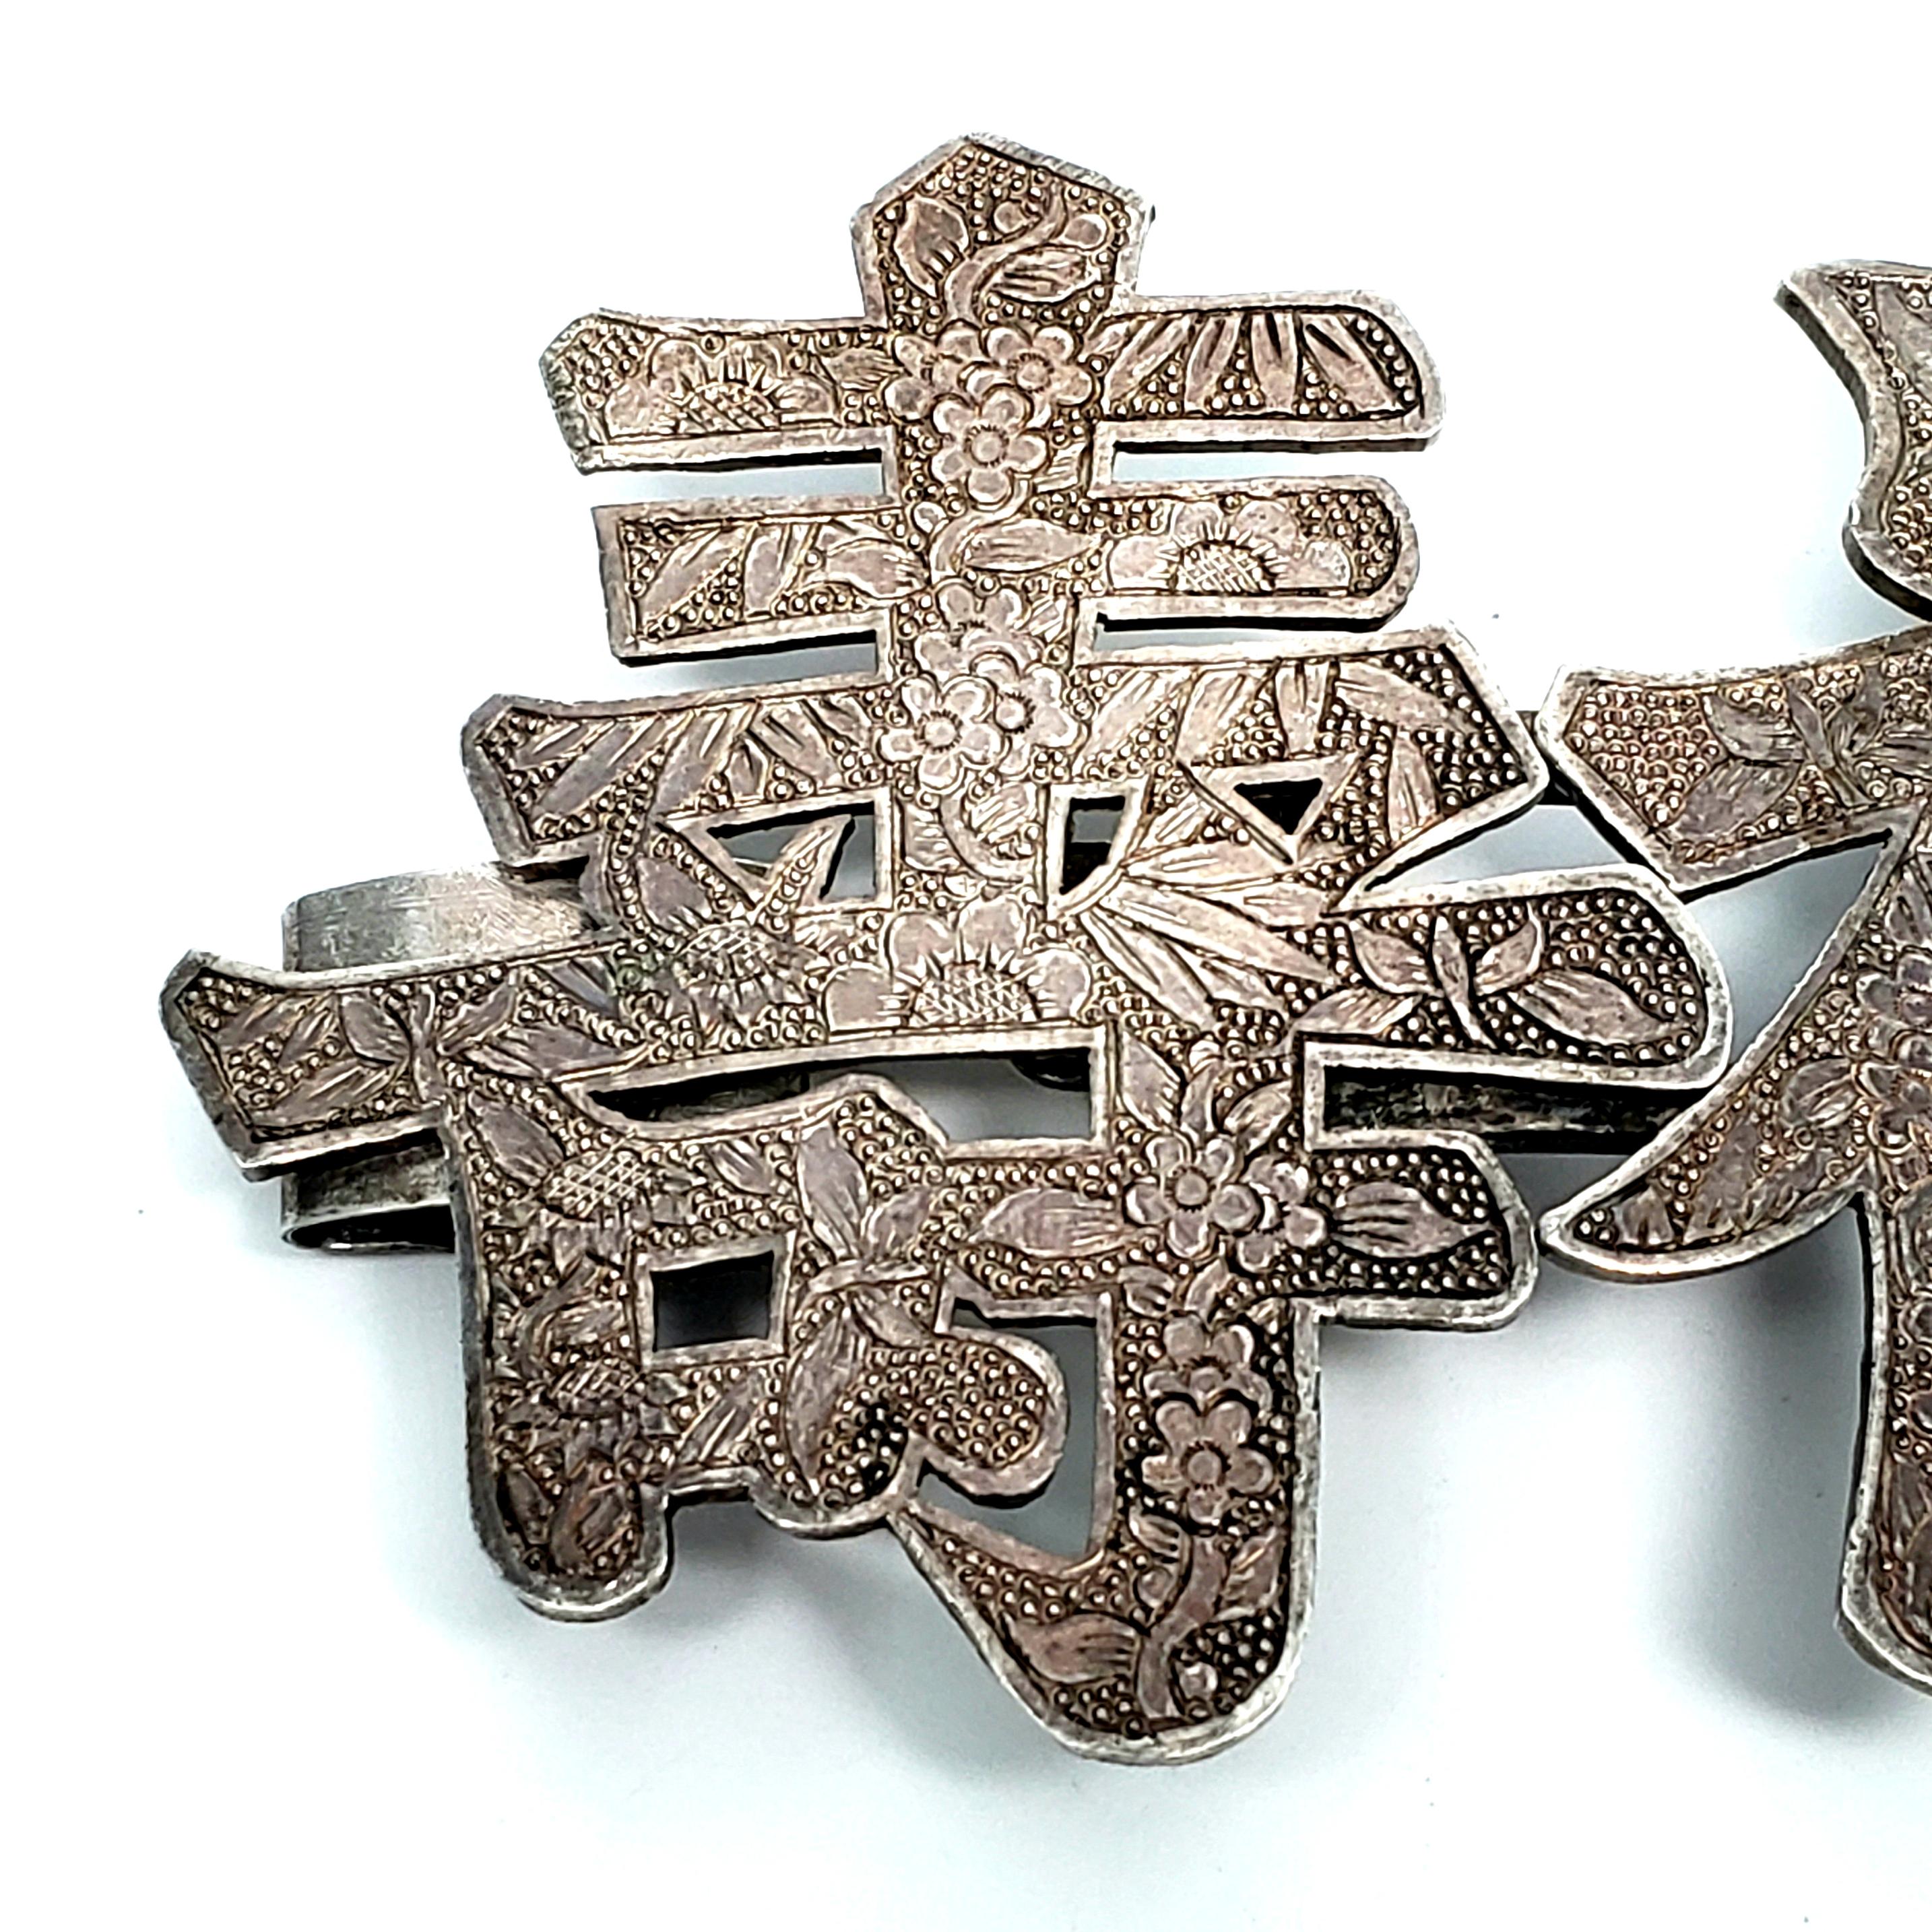 Antique Chinese Symbols 900 Silver belt buckle by Luen Wu.

This 2 piece belt buckle features 2 Chinese symbols: long life and good fortune. Each symbol is hand engraved in a floral motif.

Measures 3